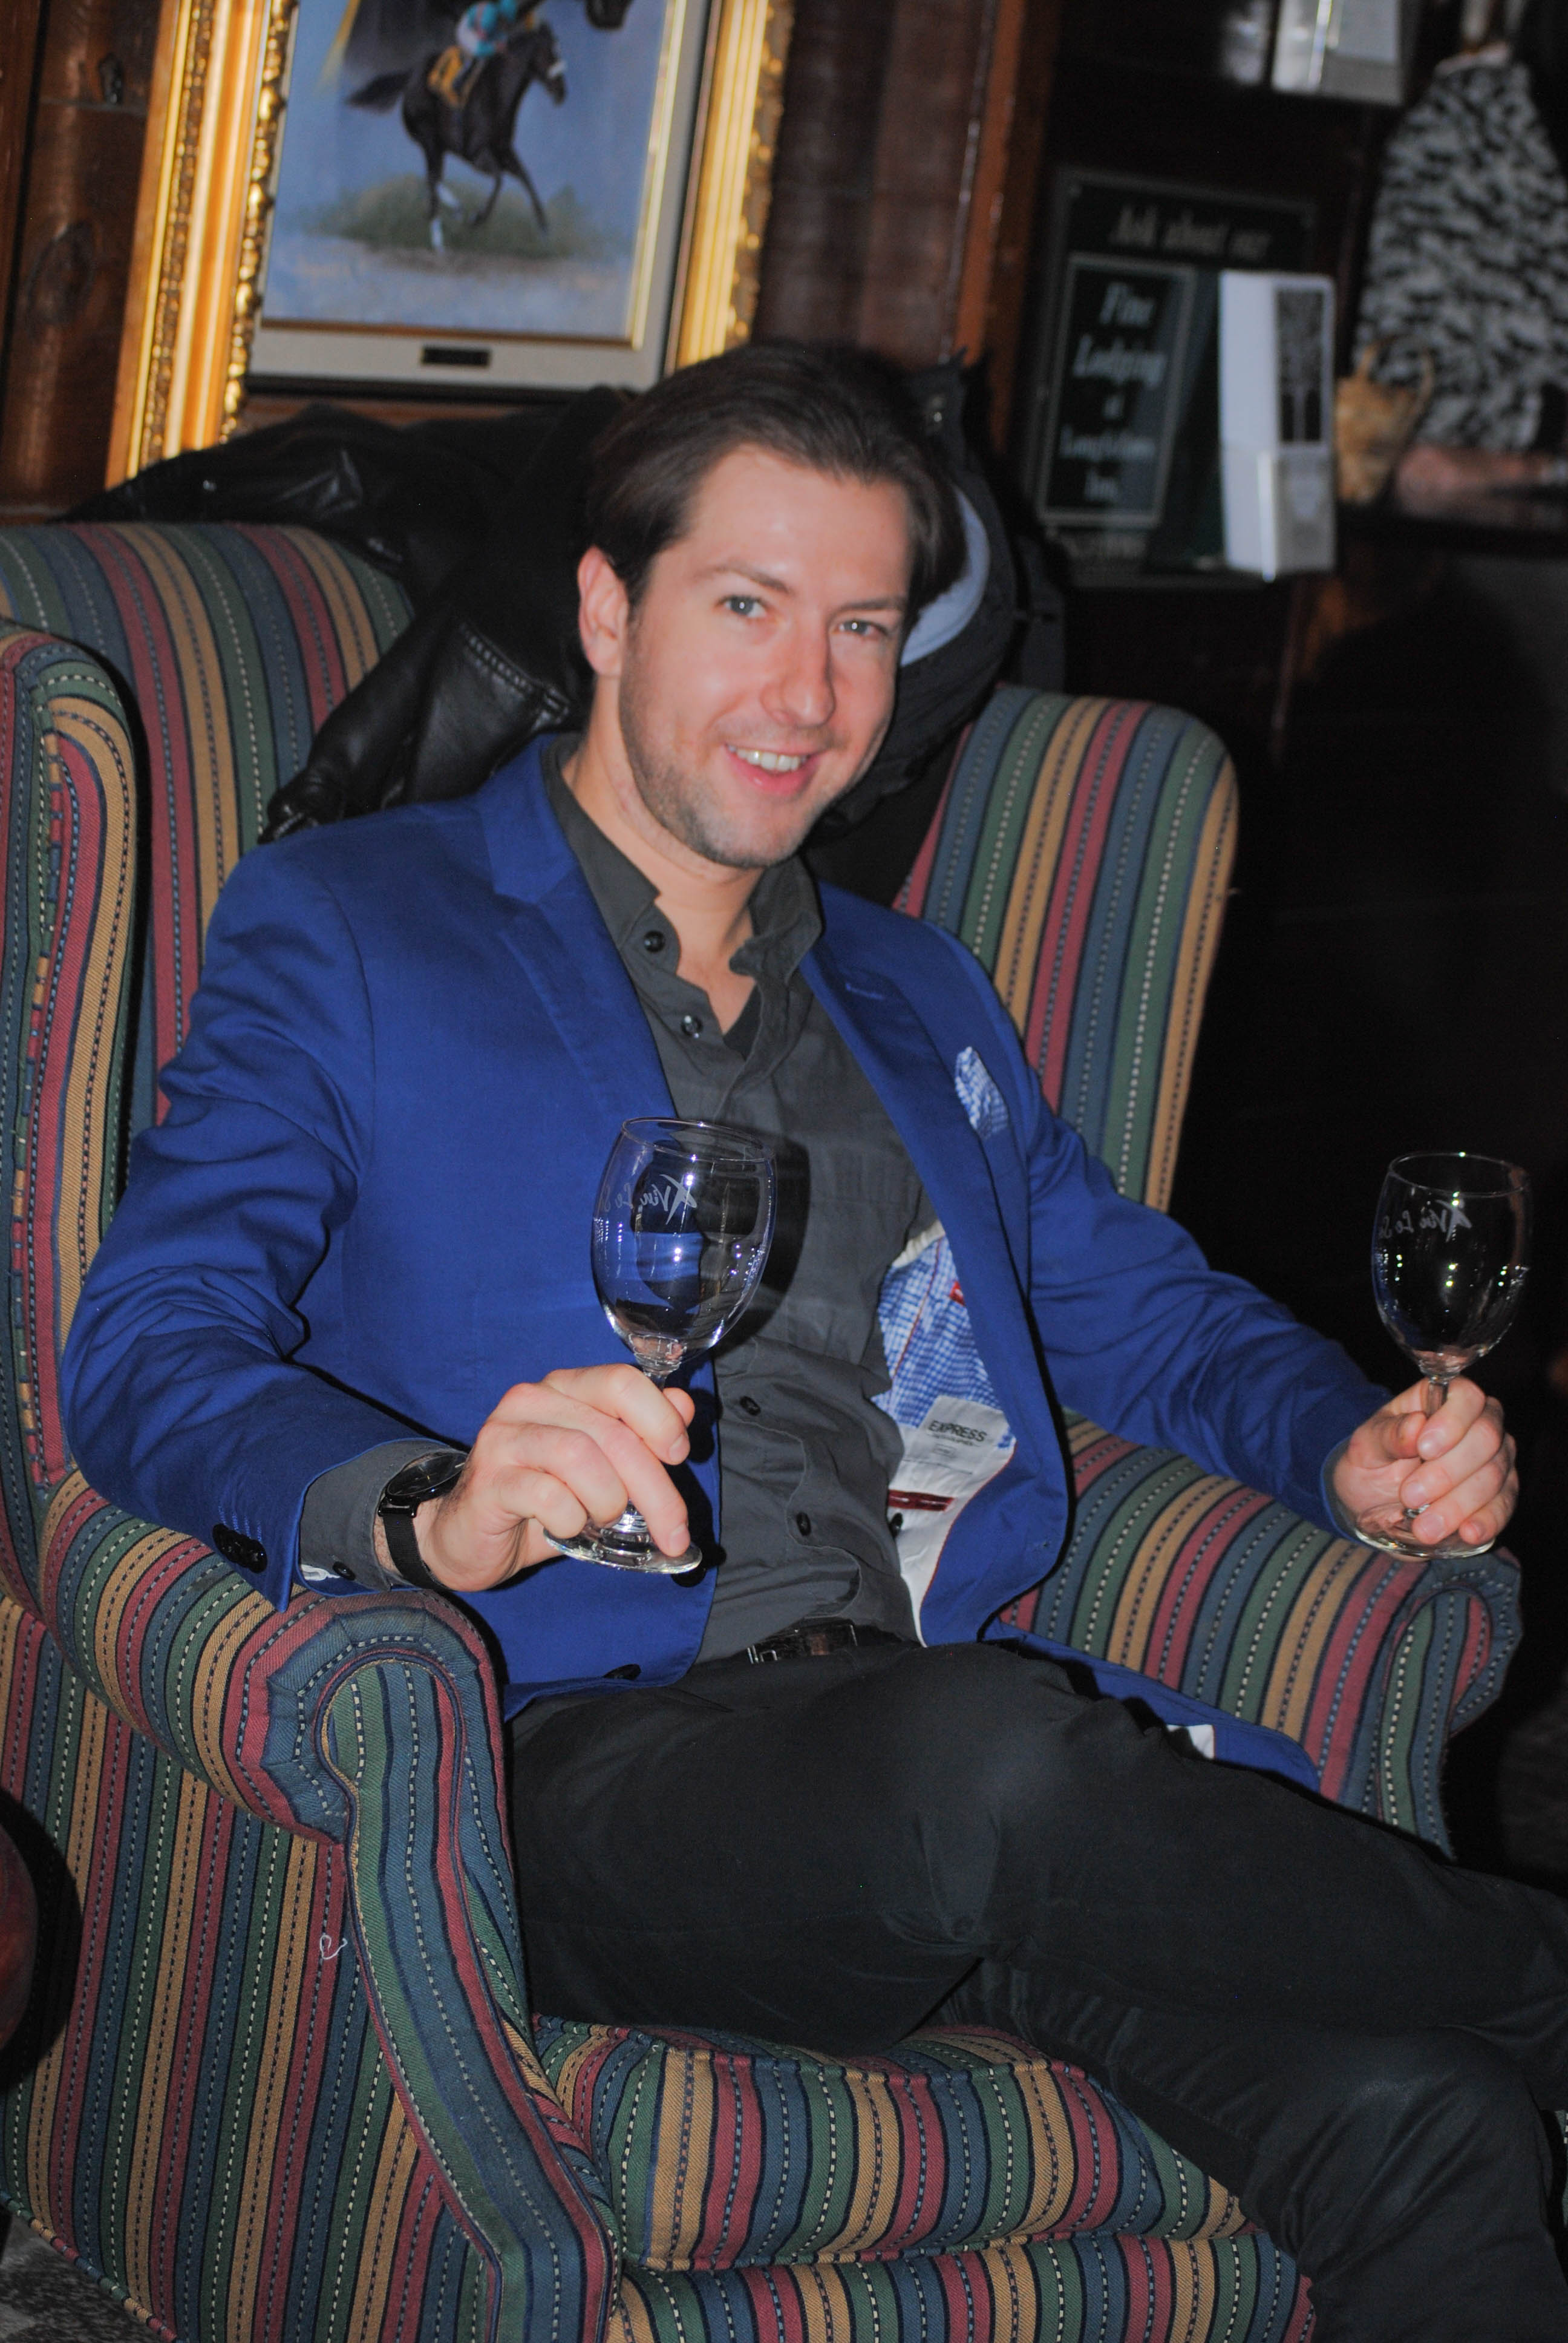 Vin Le Soir to benefit AIM Services, Inc. man sitting in lounge chair with two Vin Le Soir wine glasses